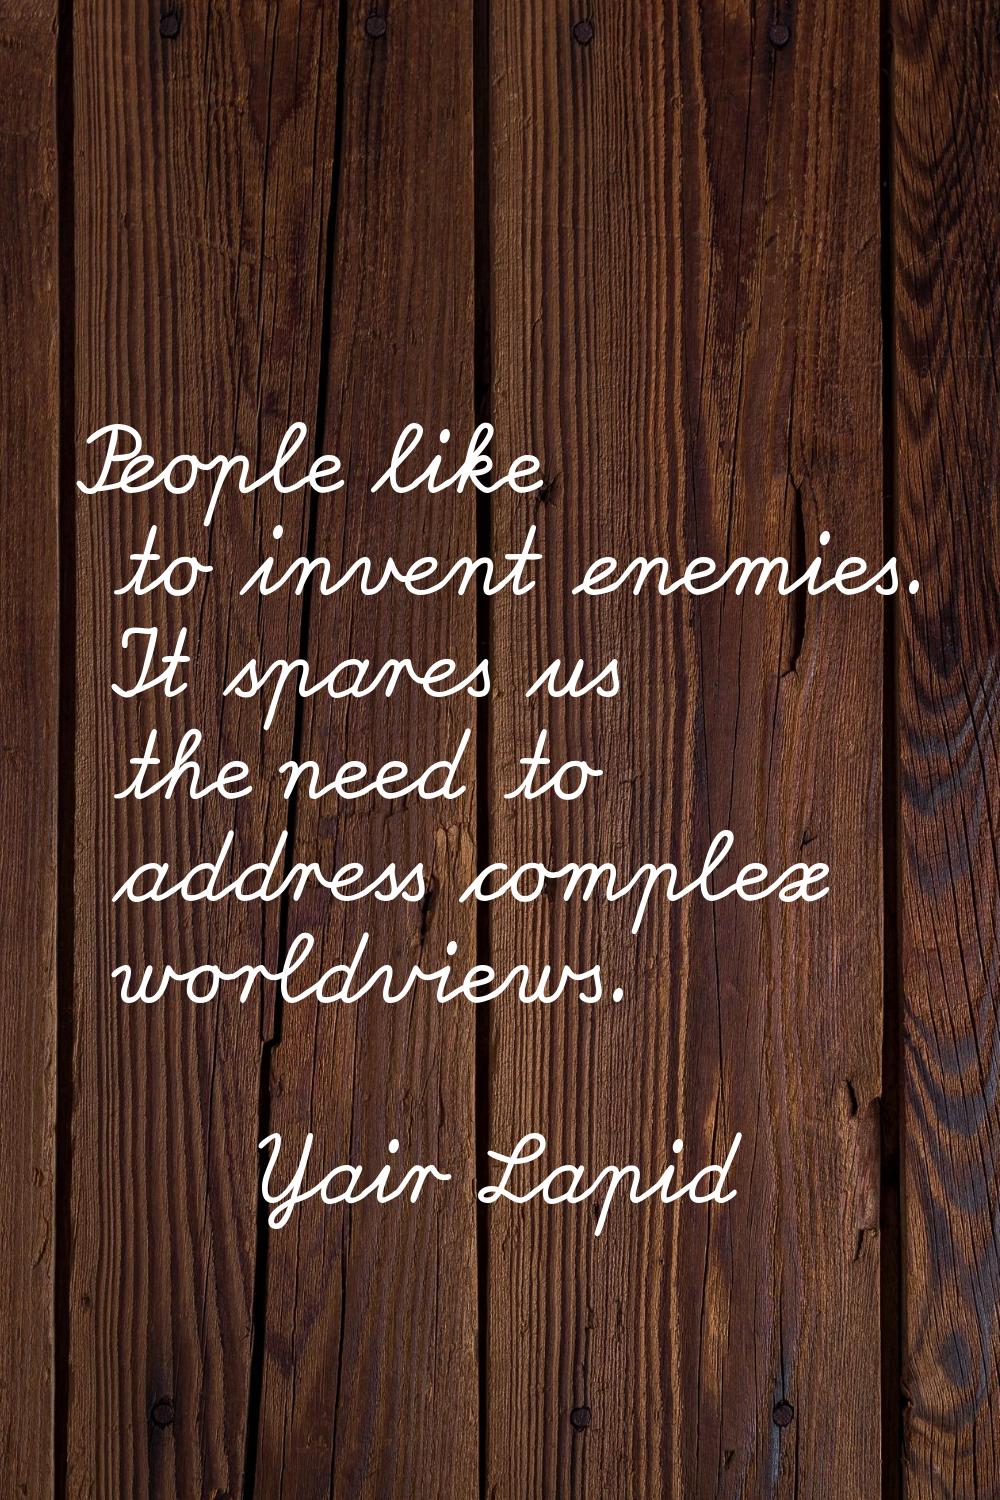 People like to invent enemies. It spares us the need to address complex worldviews.